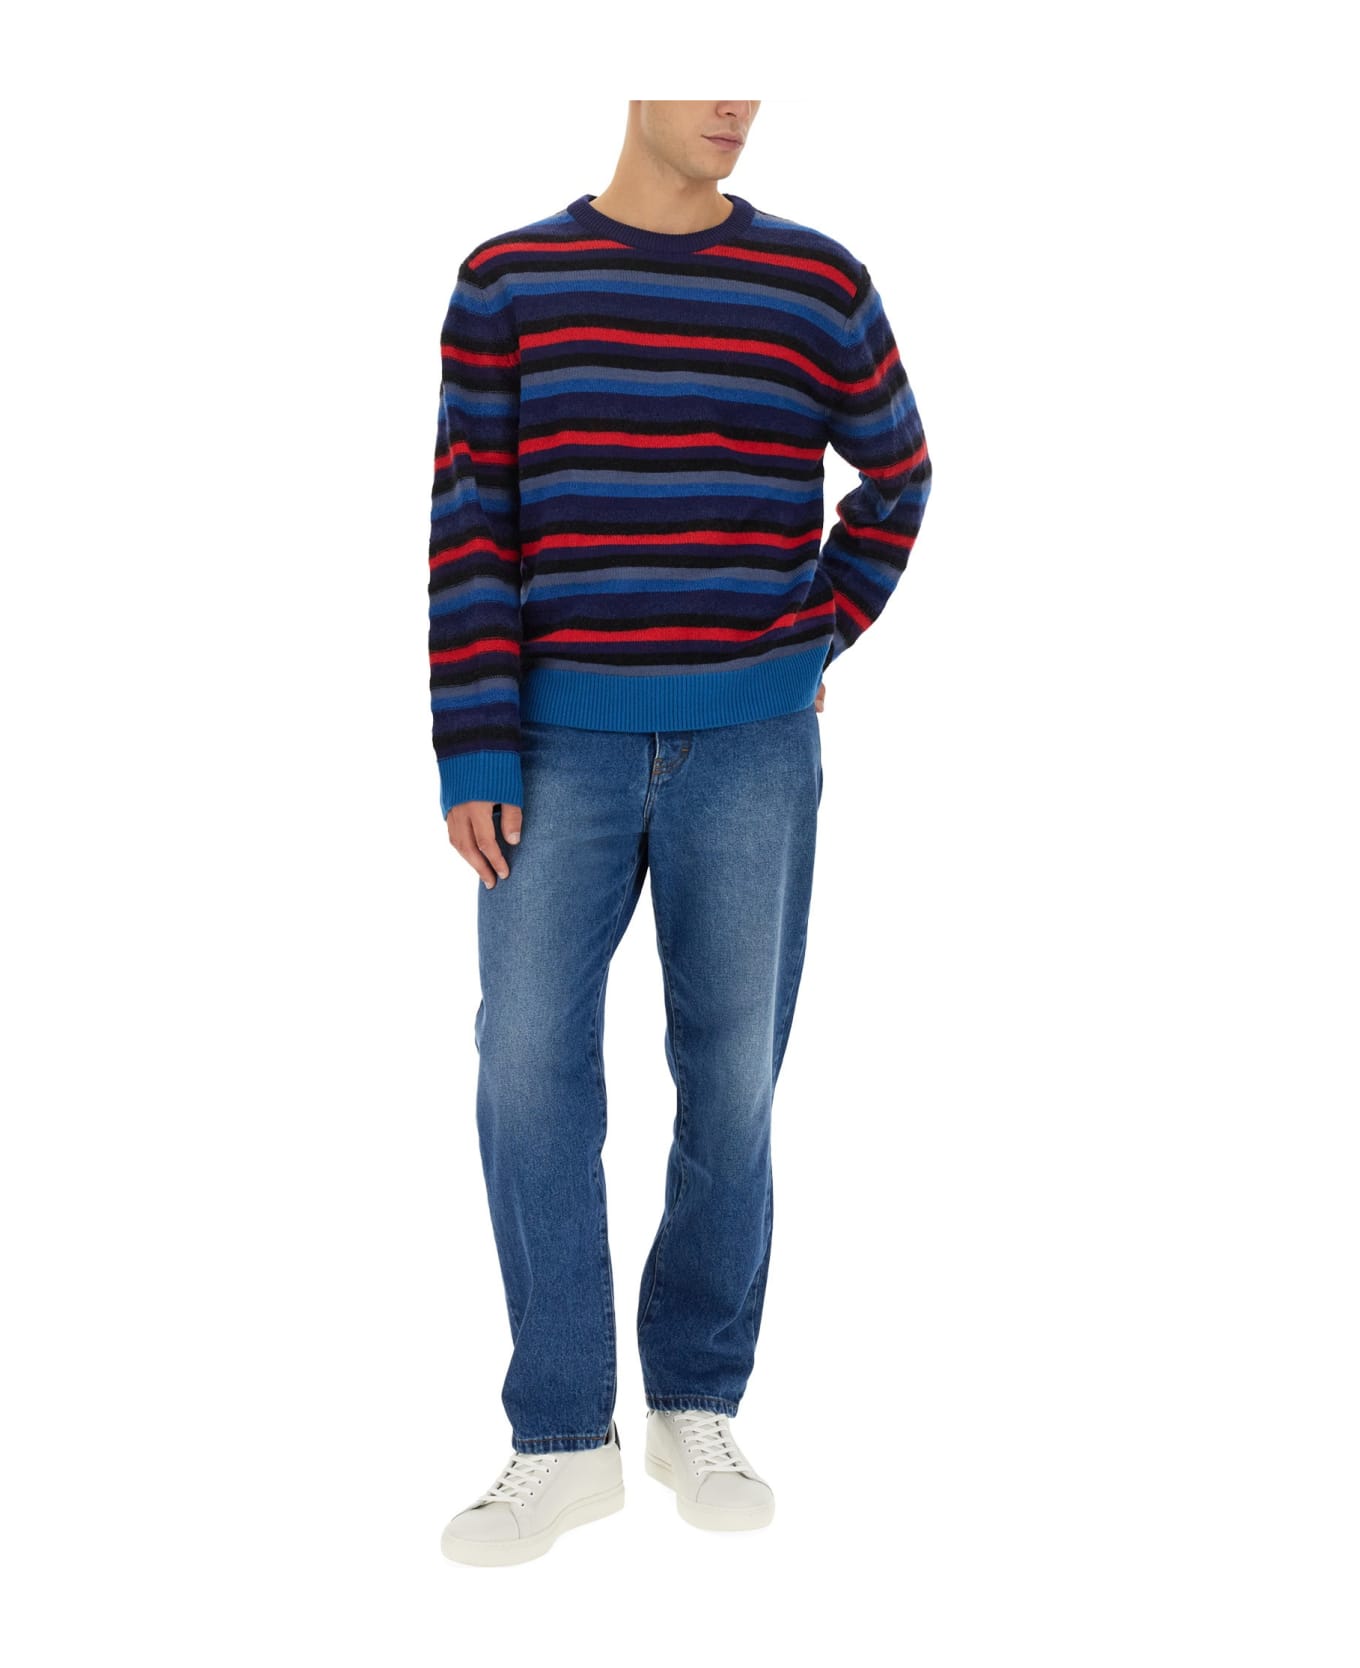 PS by Paul Smith Jersey With Stripe Pattern Paul Smith - BLUE ニットウェア